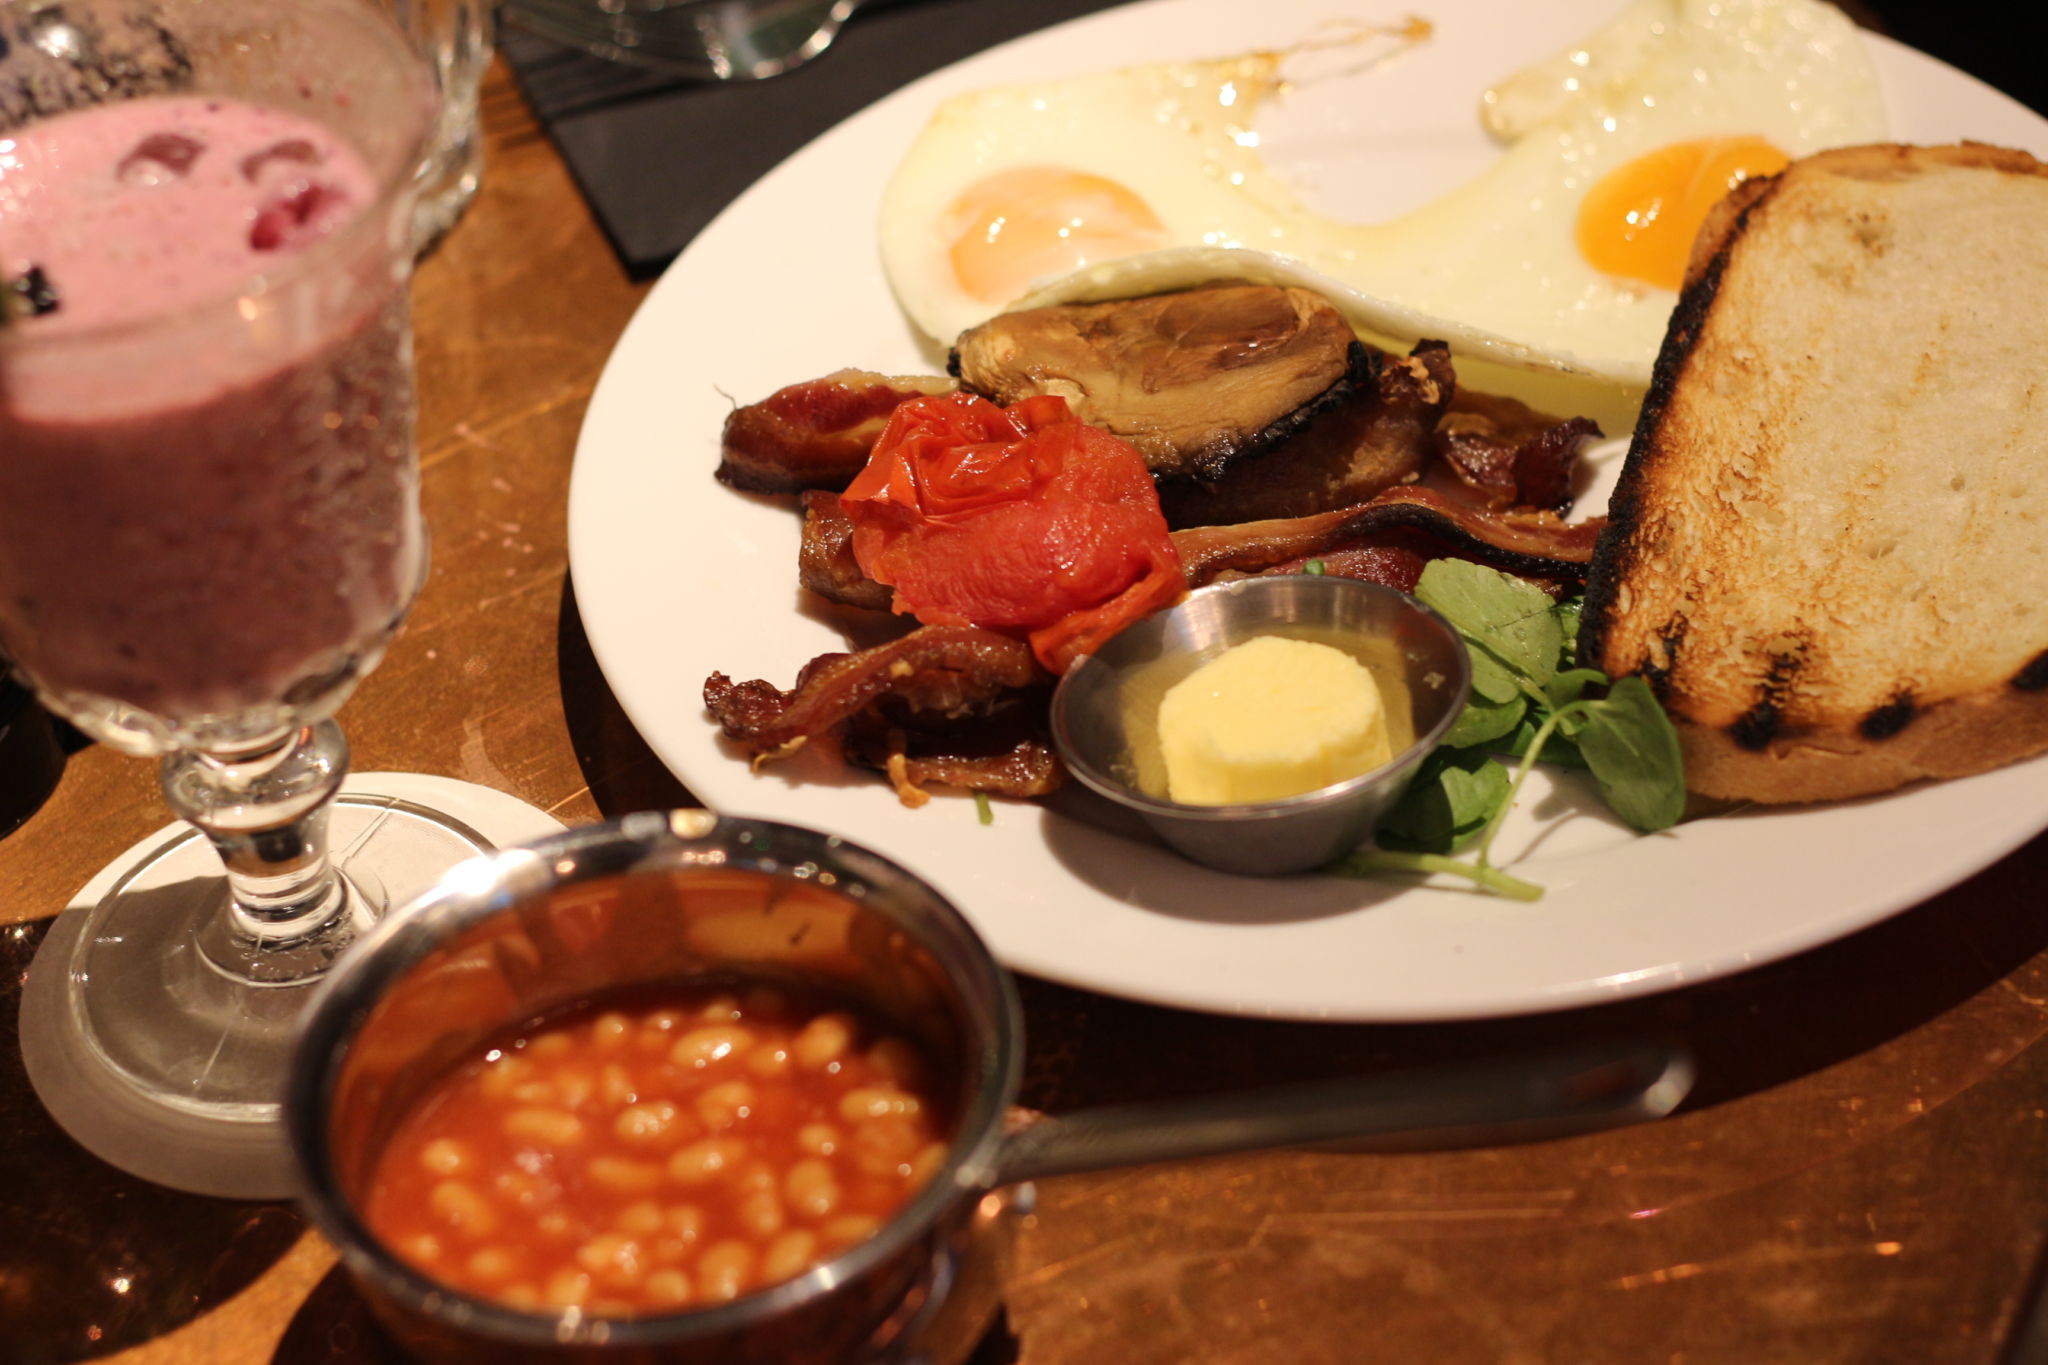 Bottomless Brunch at The Refinery, Spinningfields Manchester